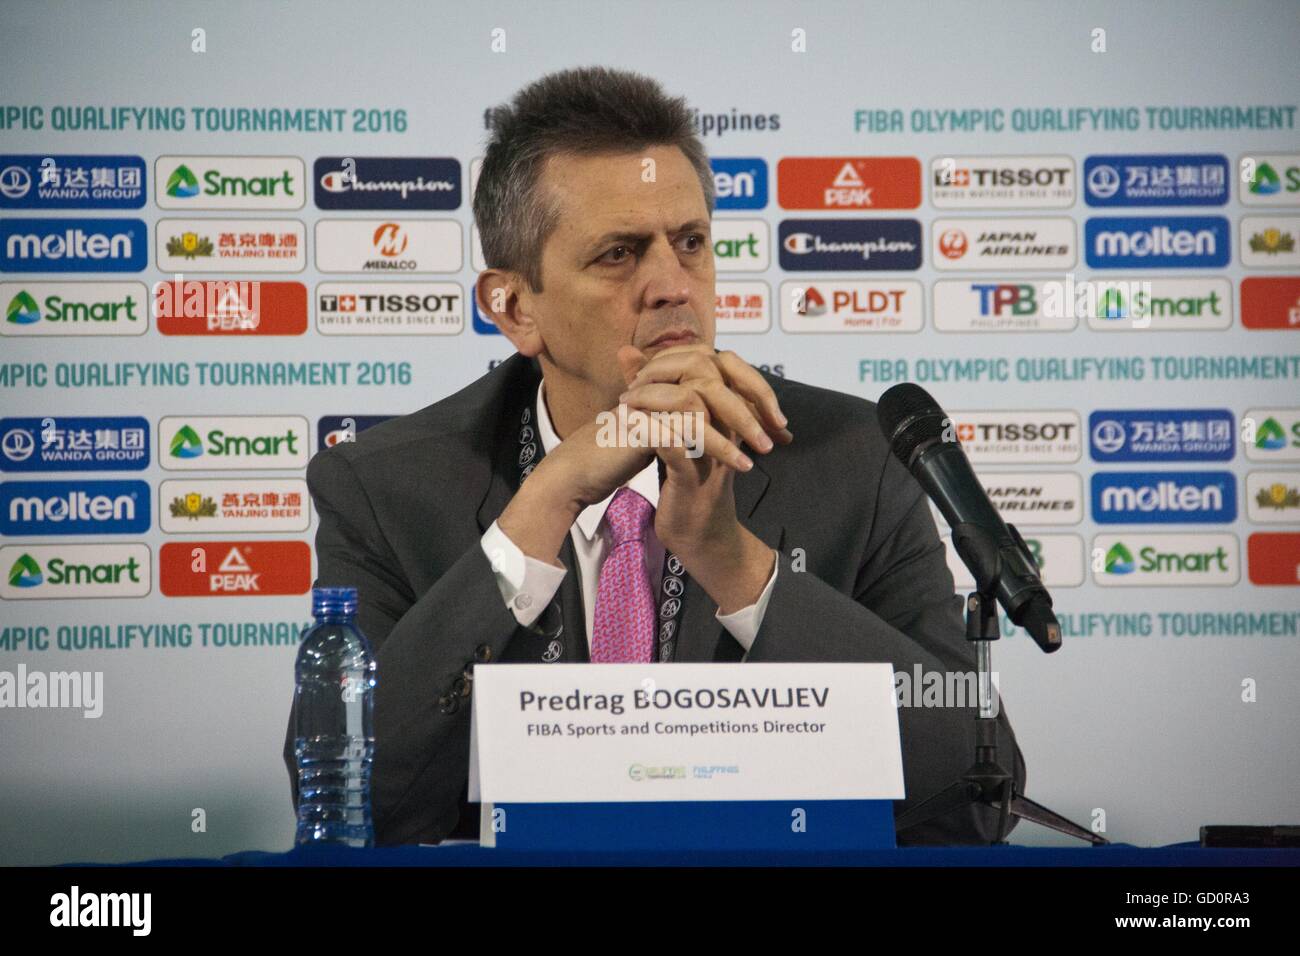 Philippines. 10th July, 2016. Predrag Bogosavljev looks on during the media discussion of FIBA competition changes. Predrag Bogosavljev (FIBA Sport & Competitions Director) and Patrick Koller (FIBA Communications Director) conducted a press conference on Sunday before the final qualifying game at the mall of Asia Arena in Pasay City, Metro Manila. The FIBA officials discussed the changes to the upcoming tournaments in the next few years. © J Gerard Seguia/ZUMA Wire/Alamy Live News Stock Photo